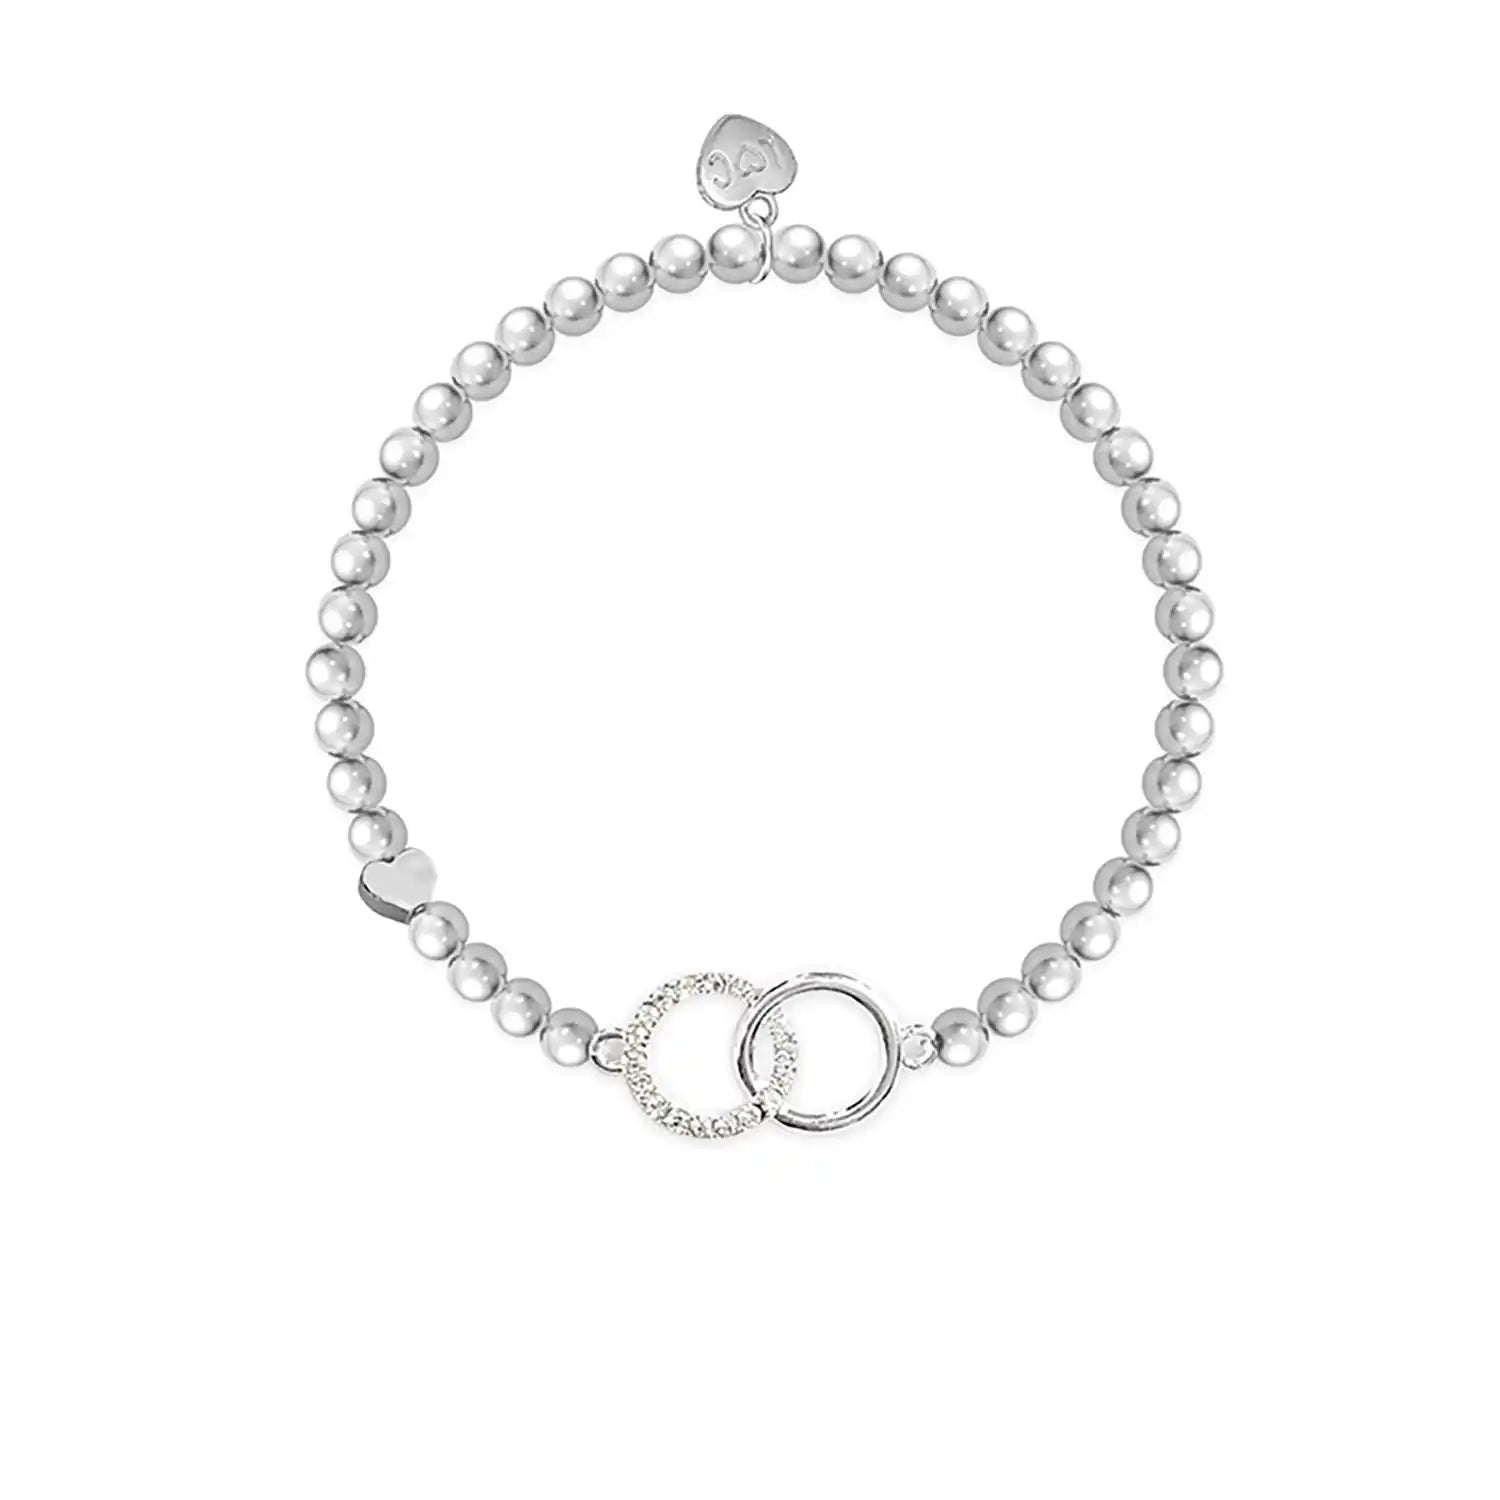 Life Charms Gorgeous Granddaughter Bracelet - Silver 1 Shaws Department Stores